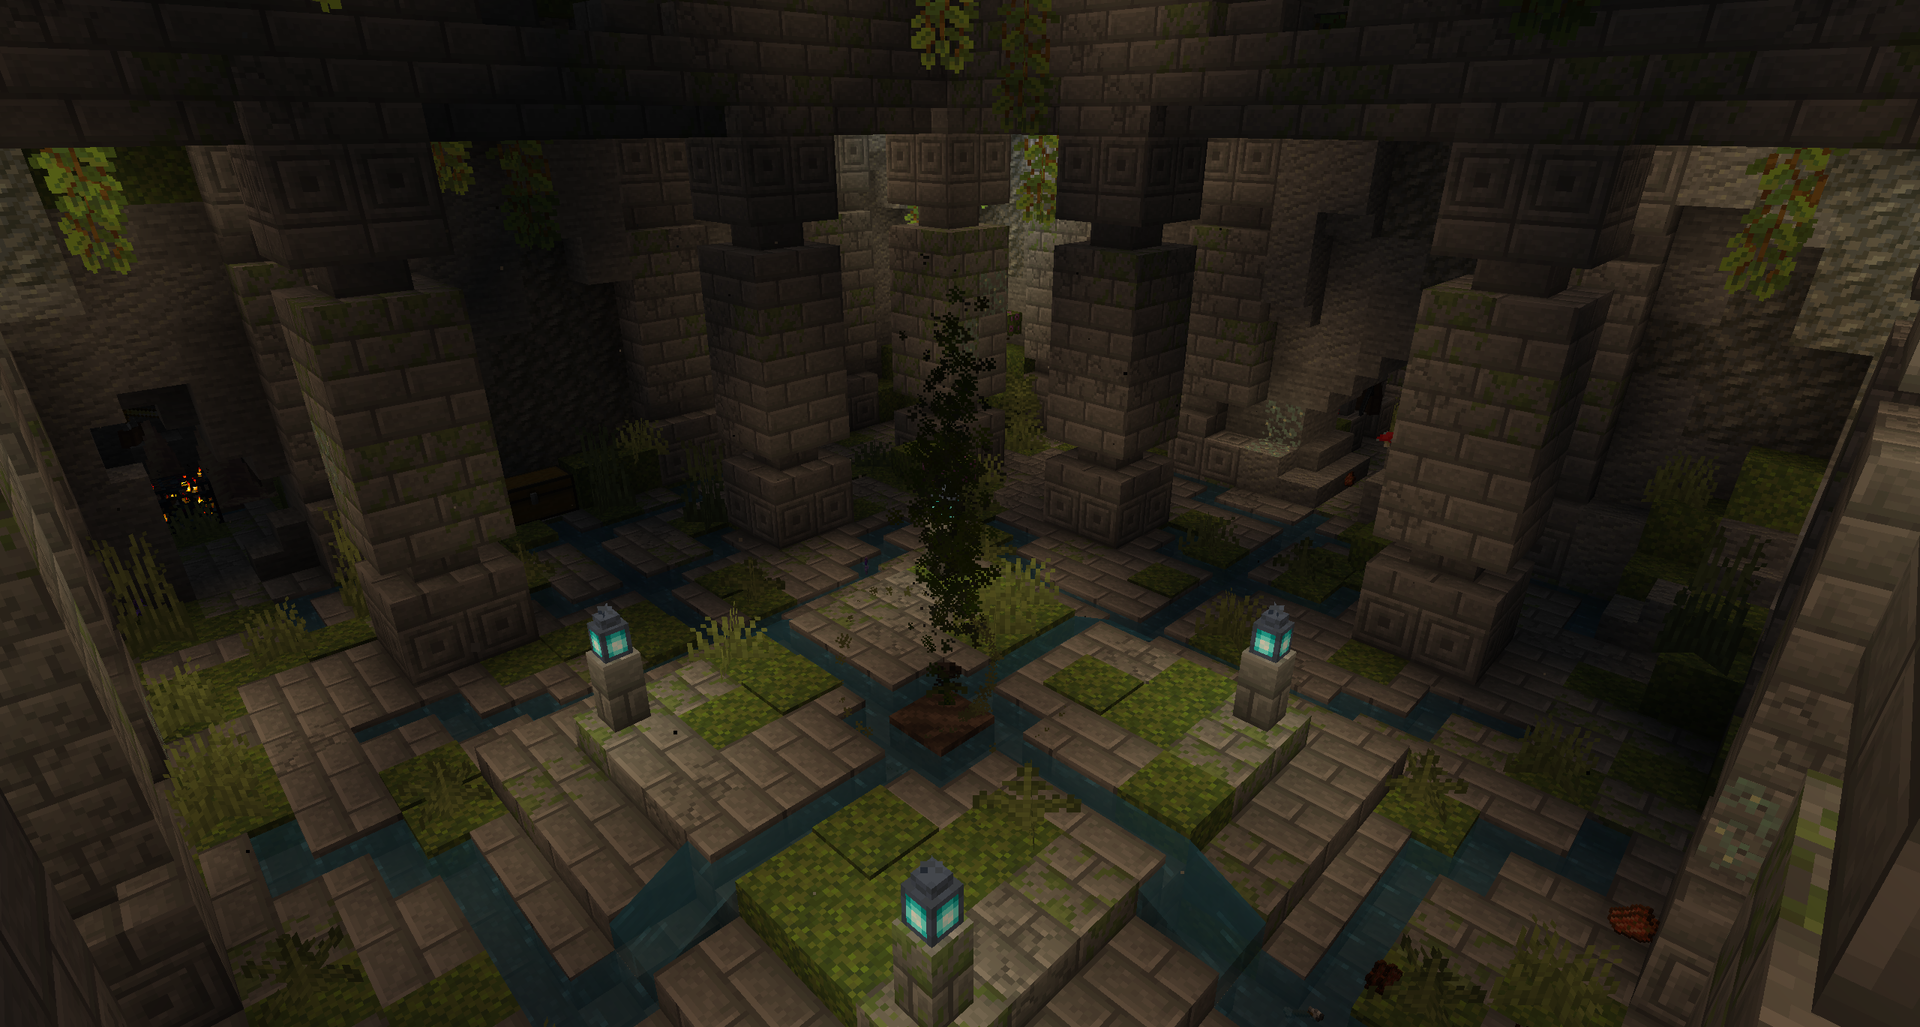 Overgrown Caves - Arena